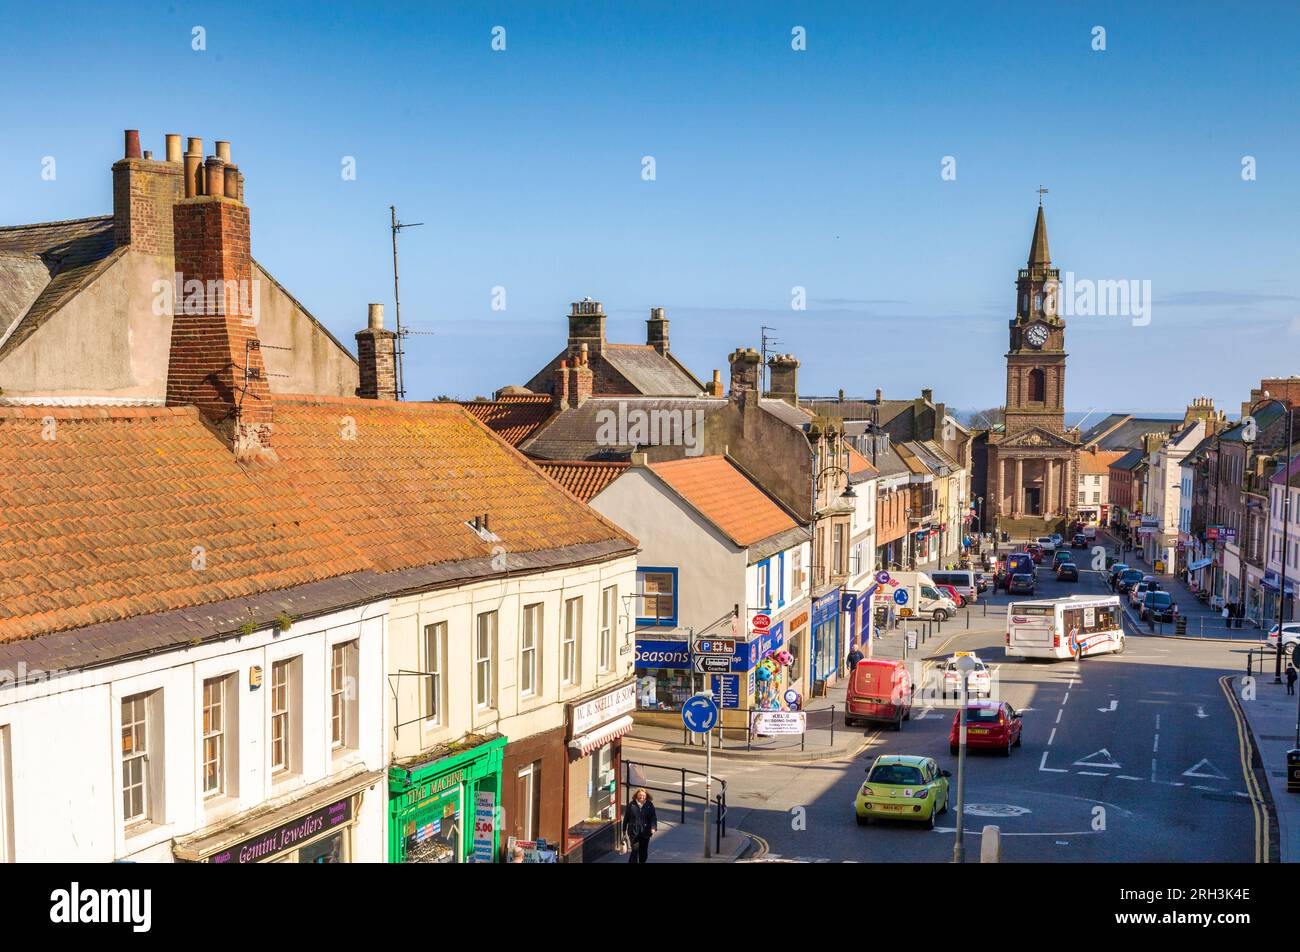 14 April 2016: Berwick-on-Tweed, Northumberland, UK - Marygate, busy with shoppers,traffic and a bus, and the Town Hall with its historic clock tower. Stock Photo